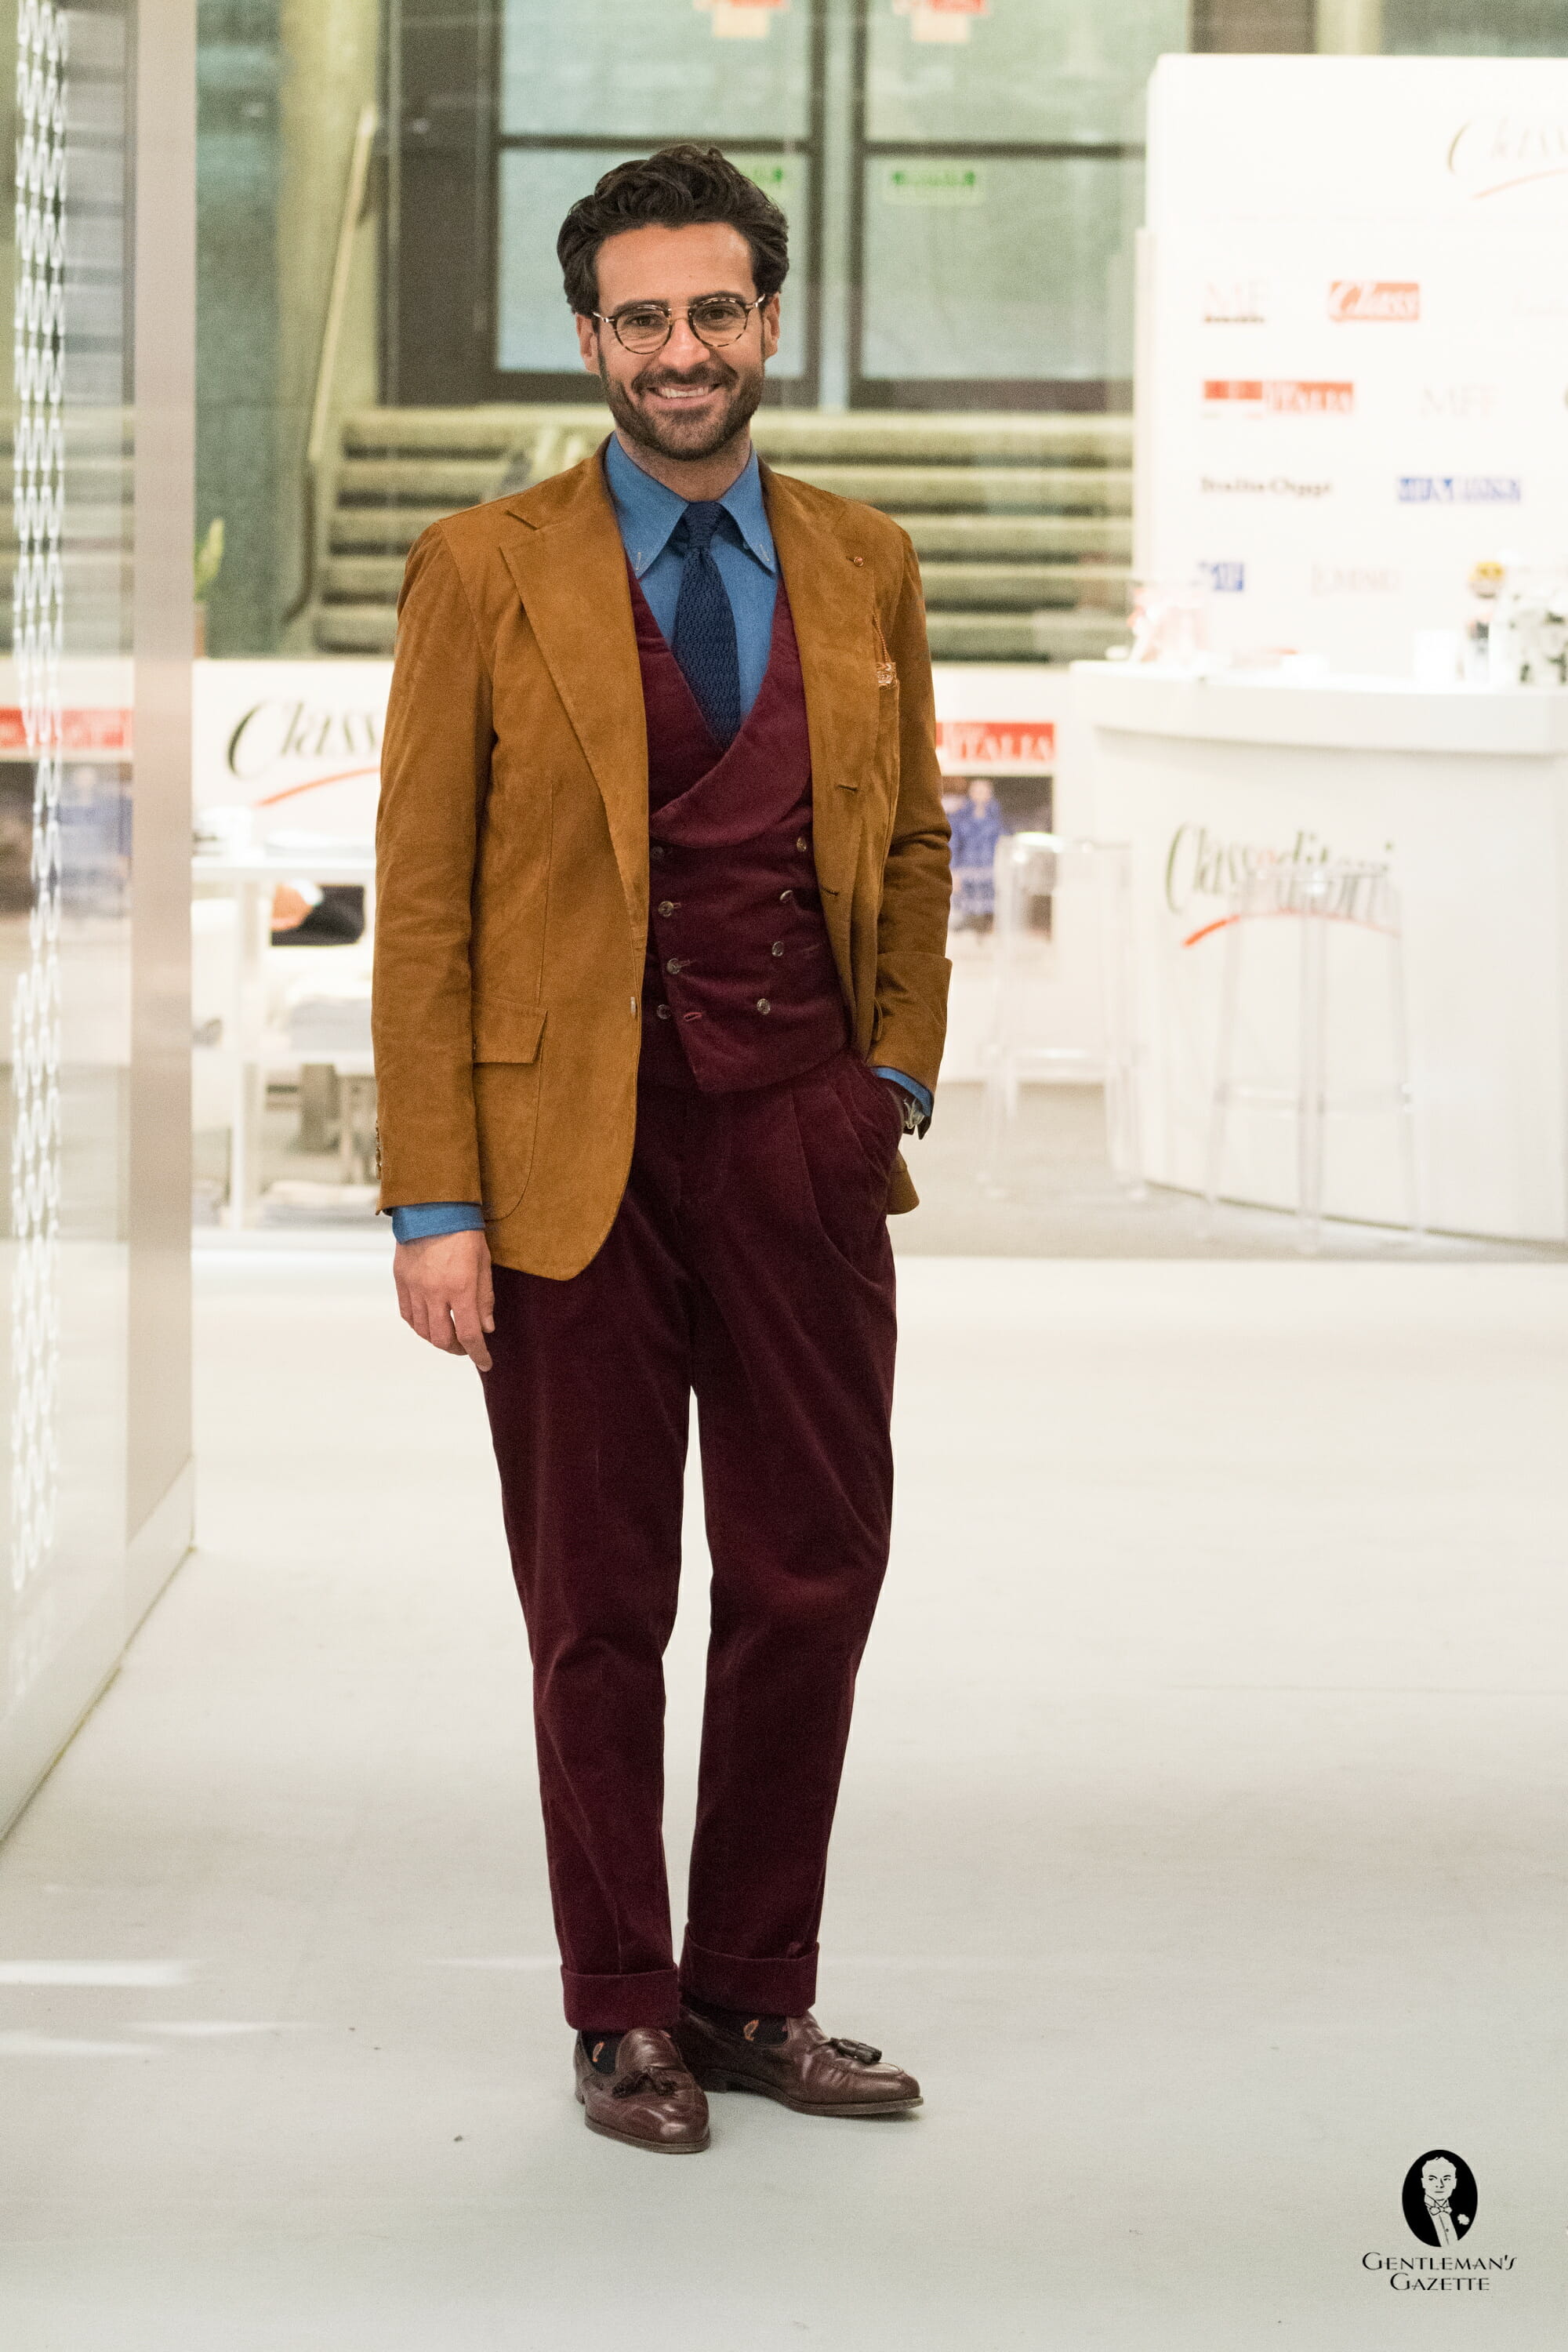 Corduroy vest and trousers paired with tassel loafers and a suede jacket